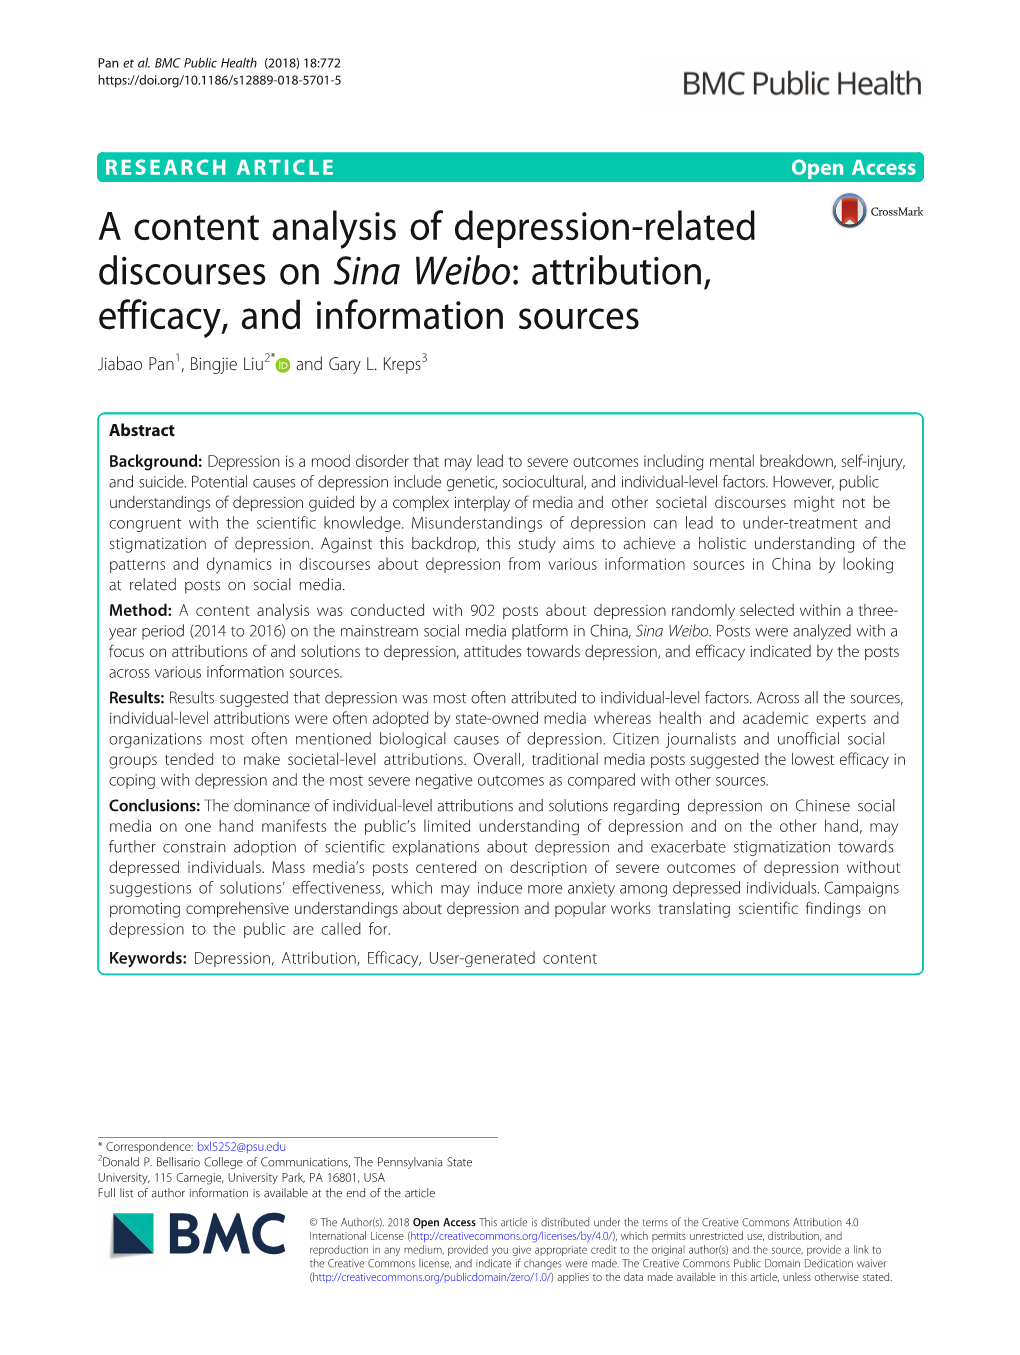 A Content Analysis of Depression-Related Discourses on Sina Weibo: Attribution, Efficacy, and Information Sources Jiabao Pan1, Bingjie Liu2* and Gary L